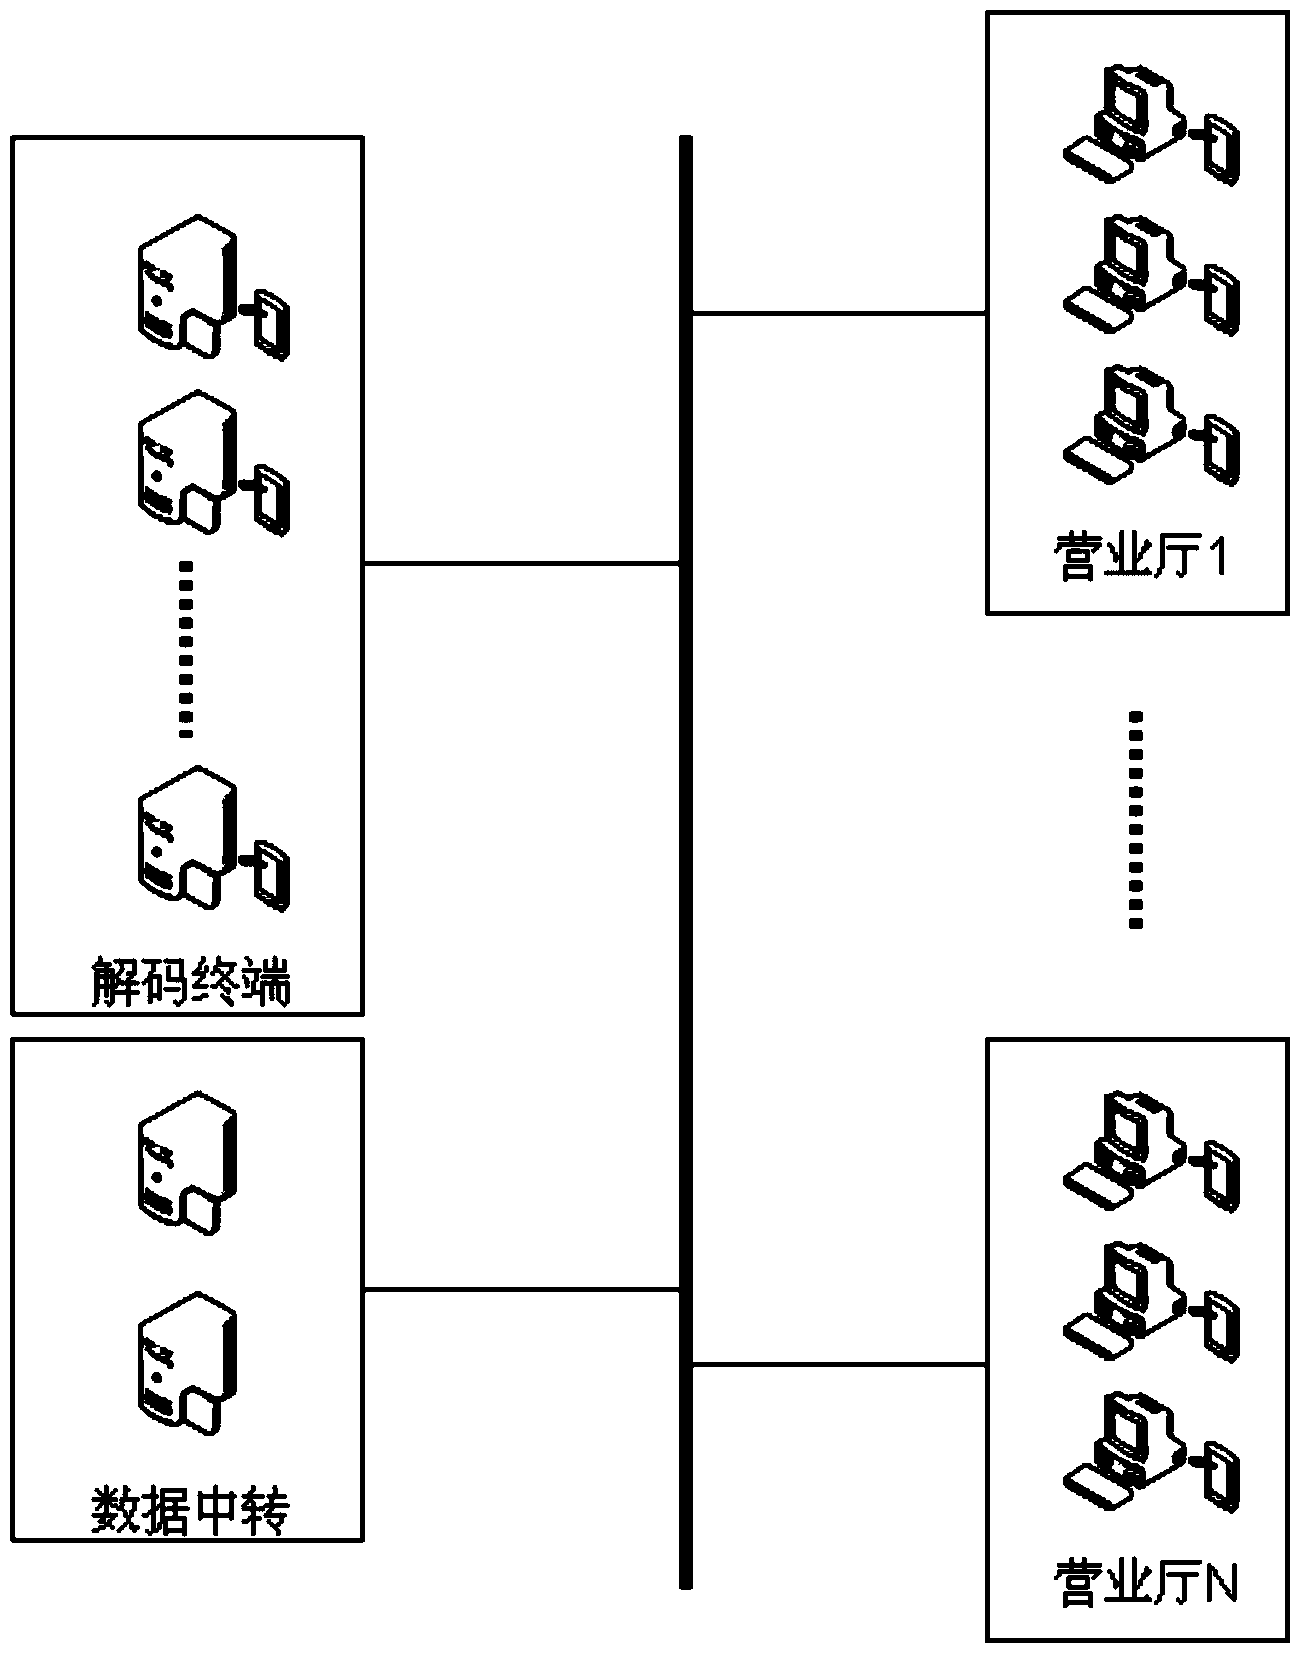 Network centralized decoding system and method of identity card identifier